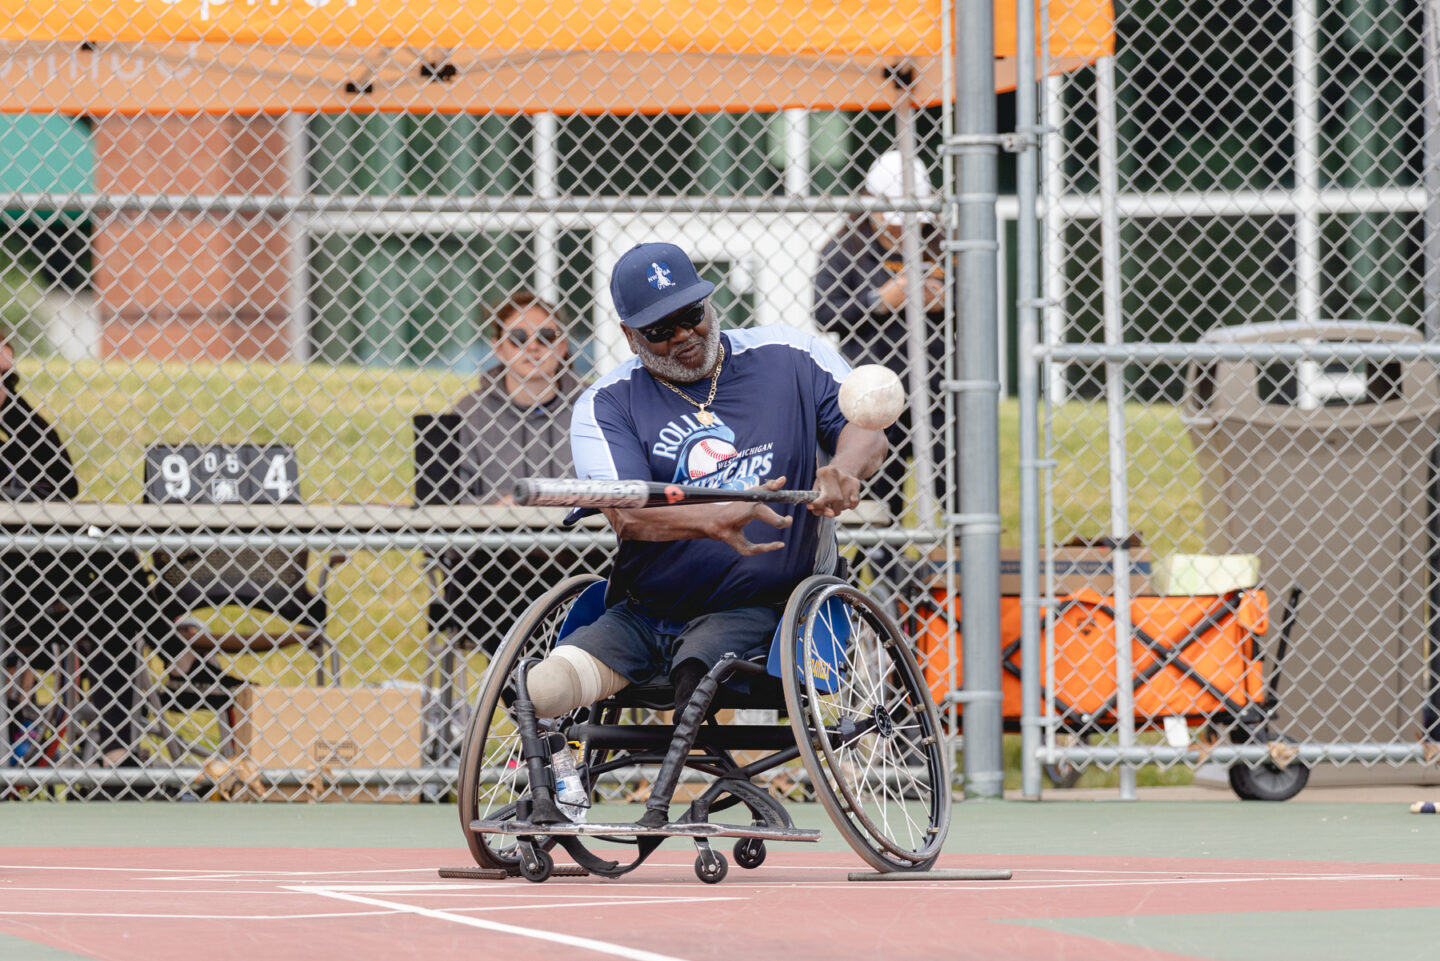 A wheelchair softball player taking a swing at the ball during an adaptive sports tournament.